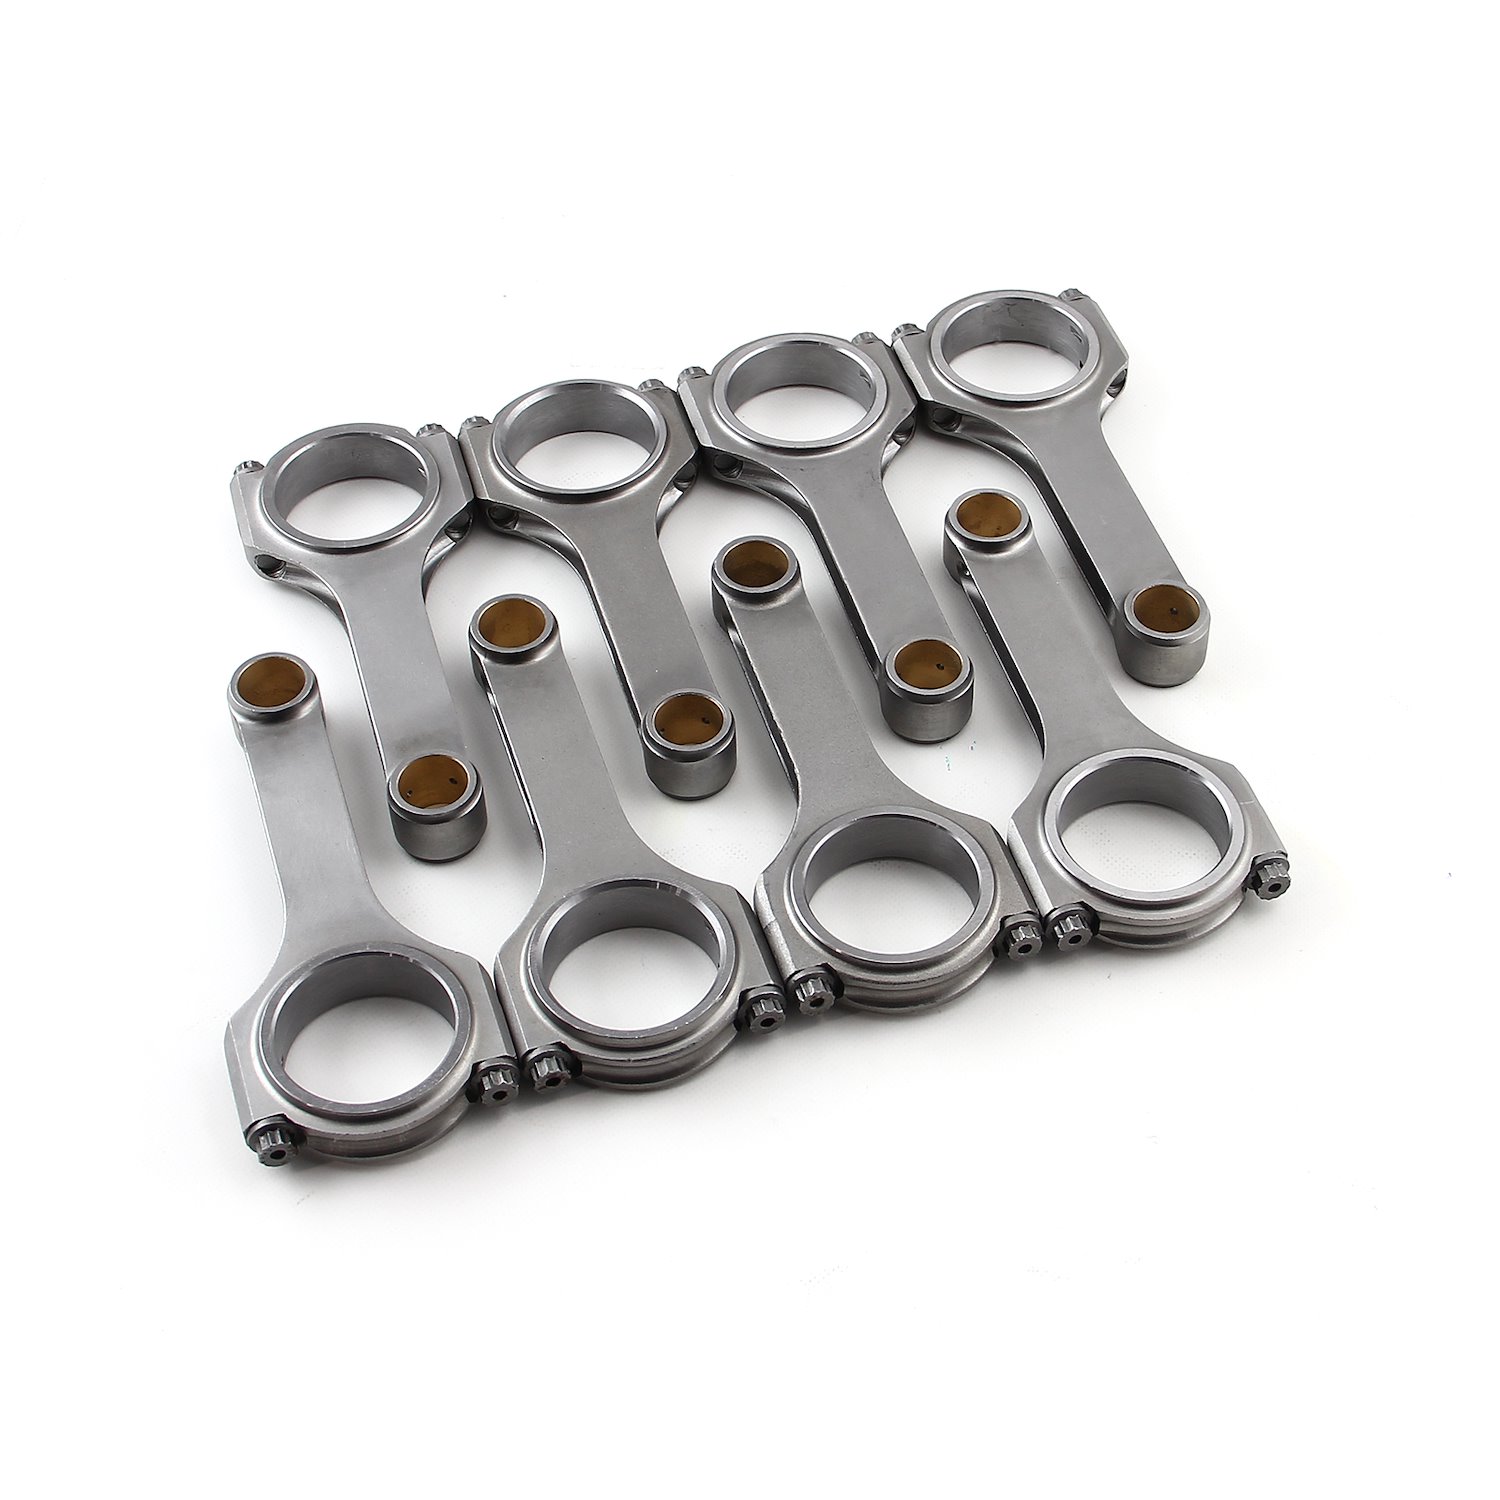 H-Beam Street/Strip Connecting Rods Small Block Chevy